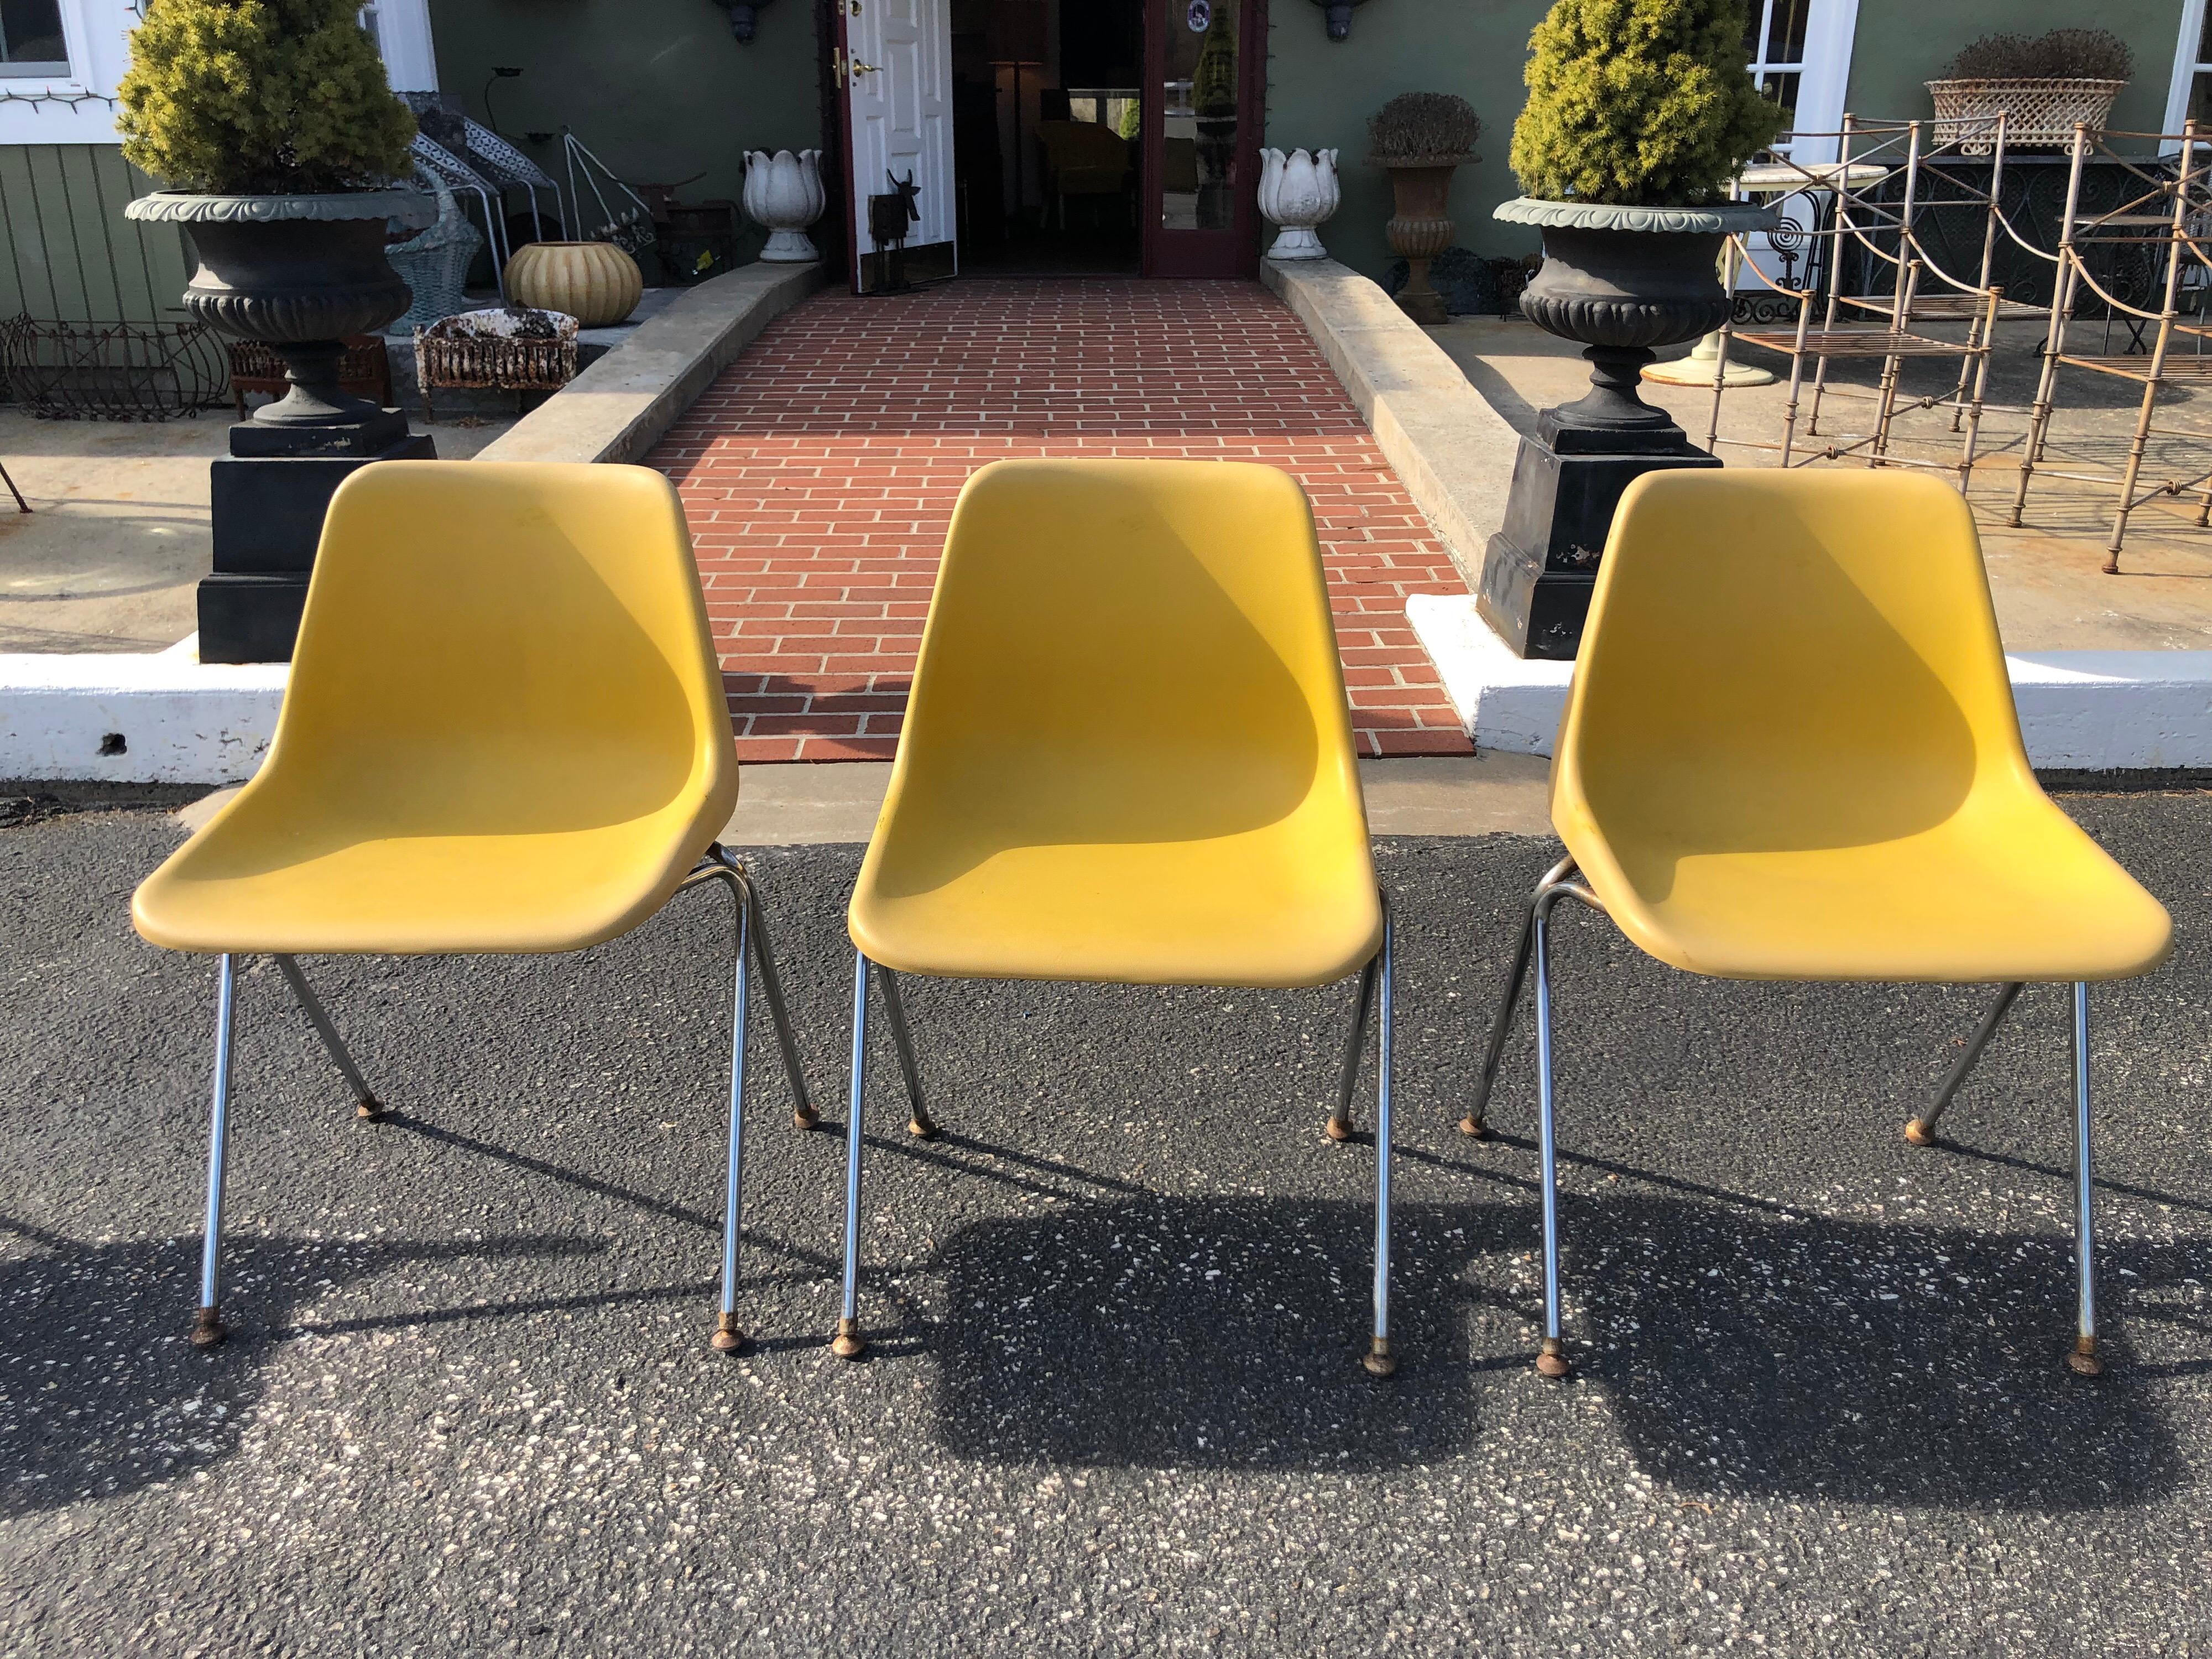 Set of three yellow Jon Stewart Stackable shell chairs. Plastic composition with metal lag base. Signed on underside of plastic seat. Fourth chair is faded more than the others so will include at no cost. Rust to metal base and legs. Plastic roller